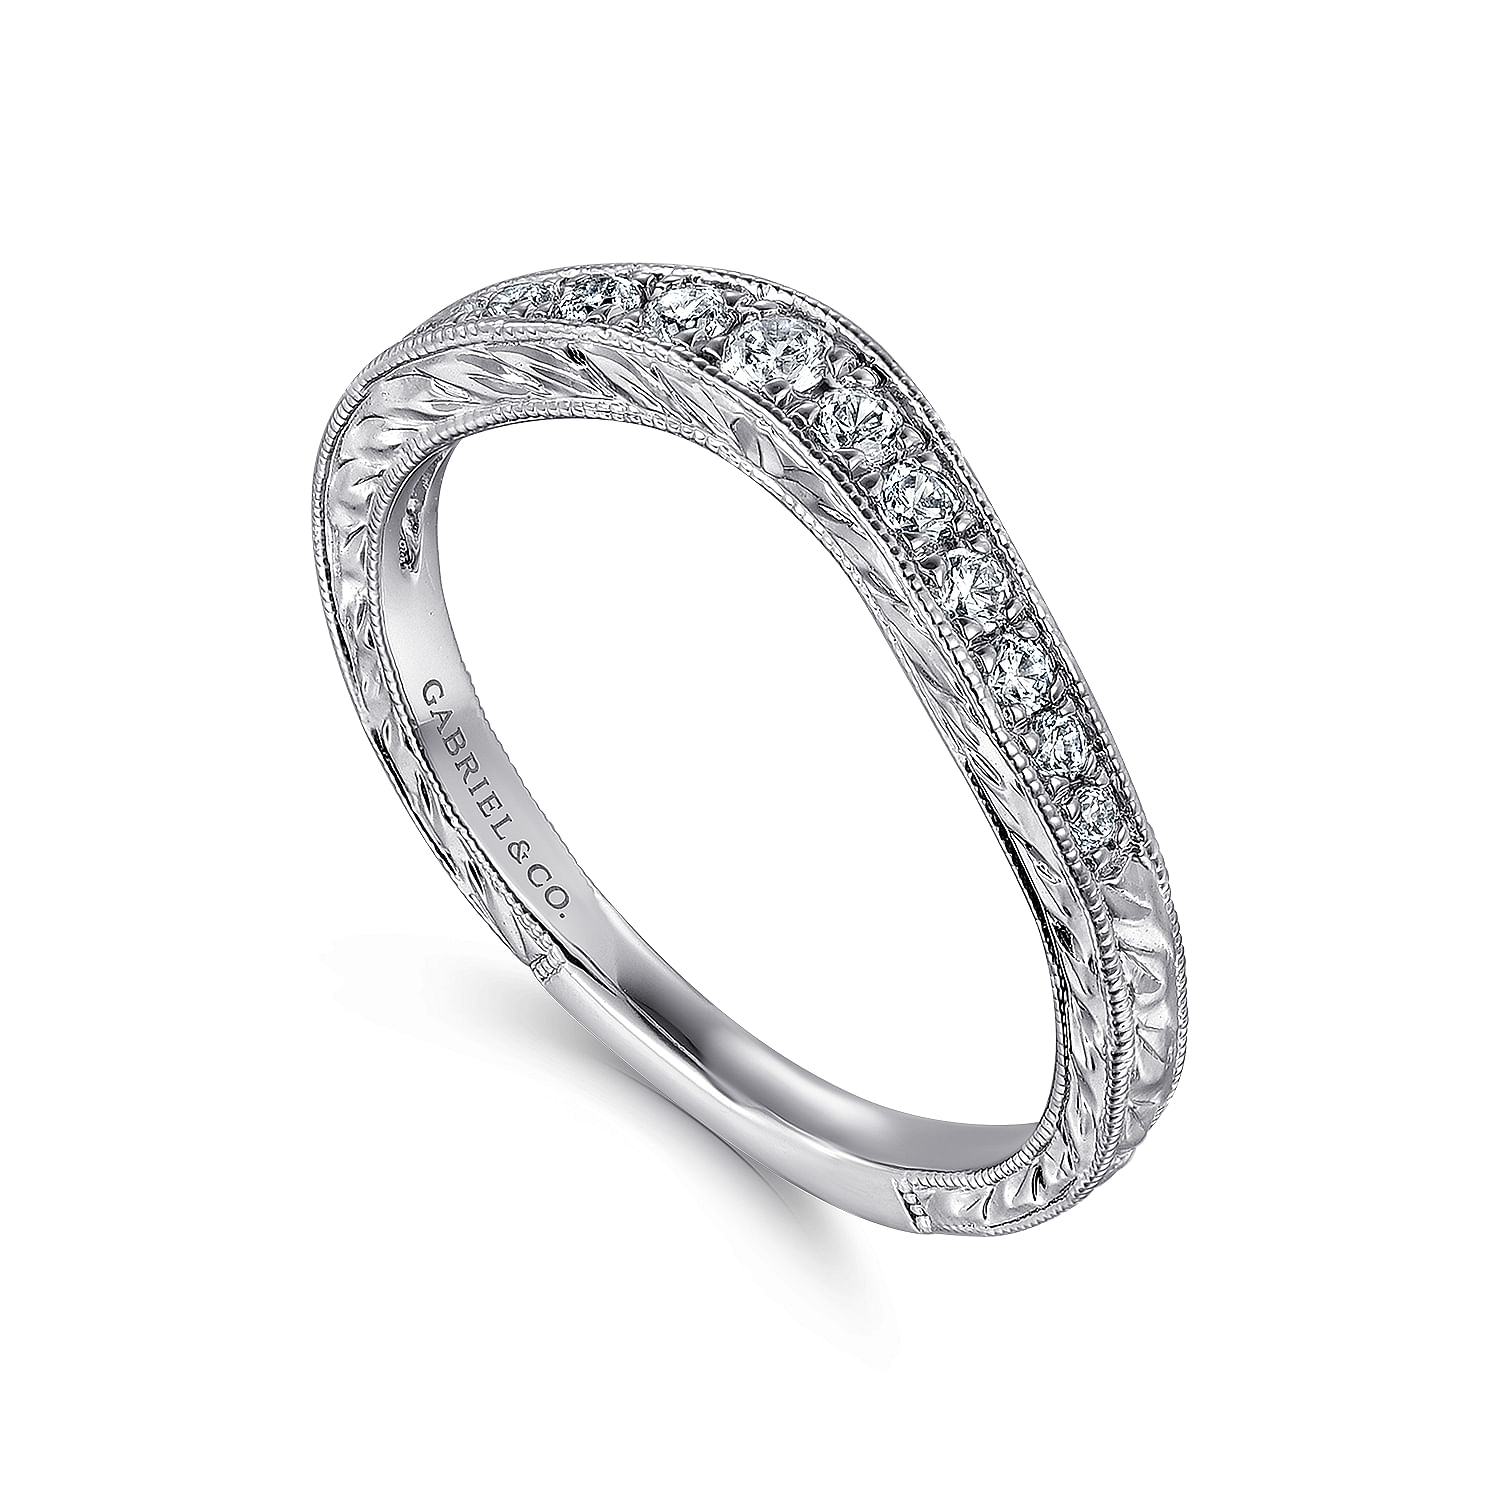 Provence - Vintage Inspired  Curved 14K White Gold Micro Pave Diamond Wedding Band with Engraving - 0.25 ct - Shot 3